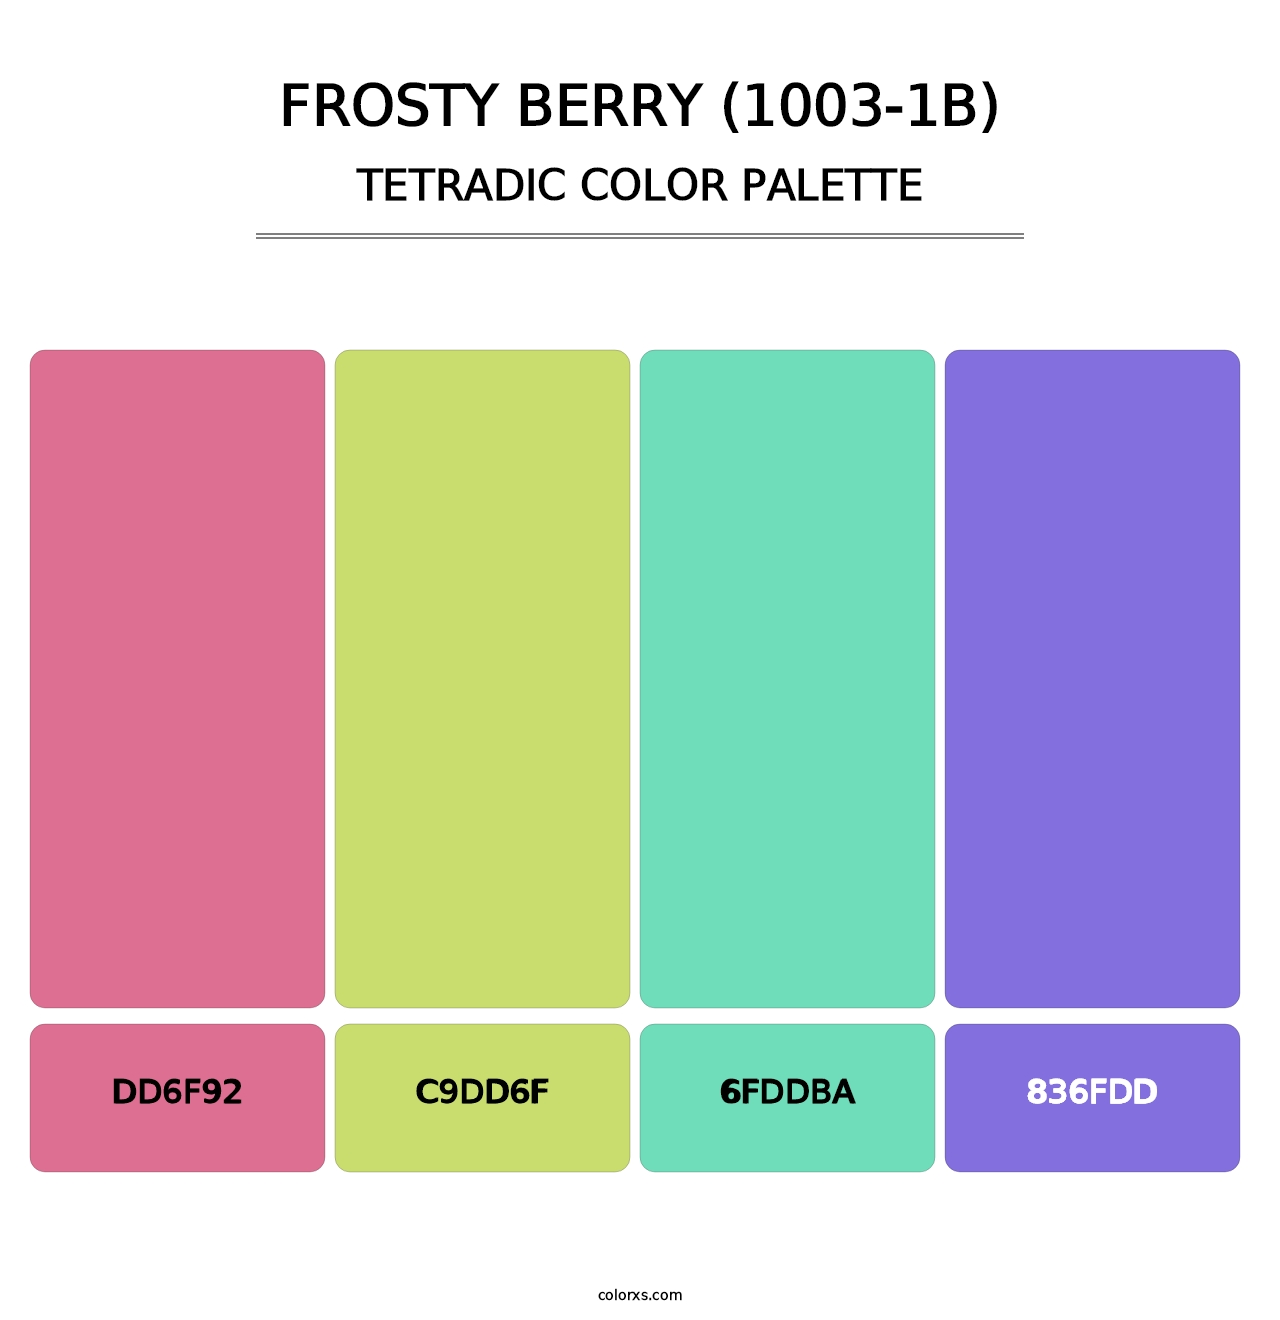 Frosty Berry (1003-1B) - Tetradic Color Palette